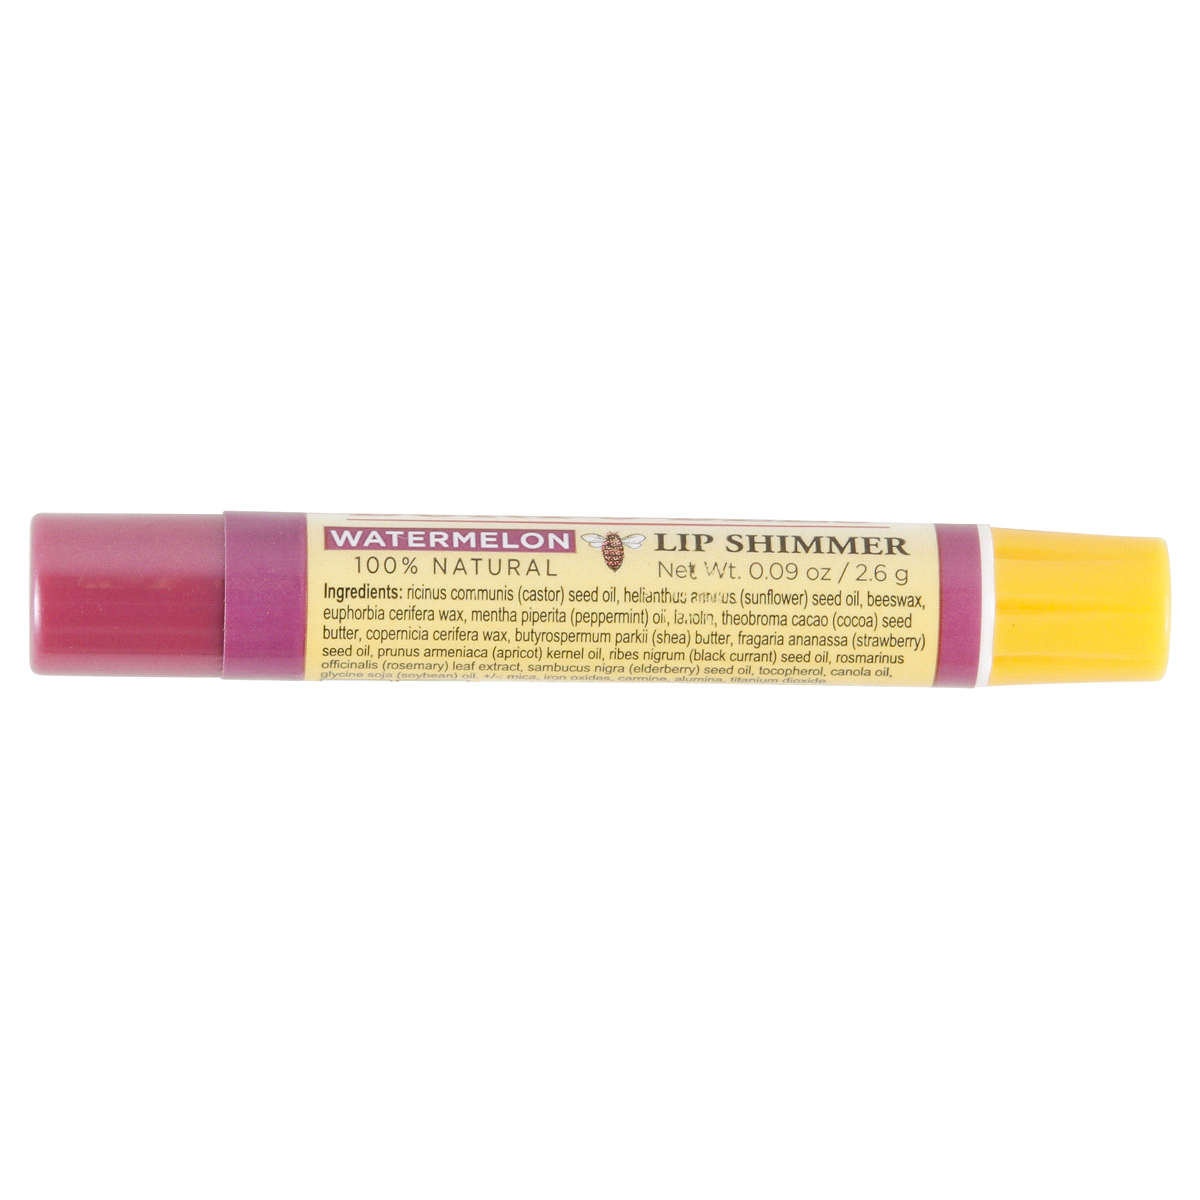 slide 17 of 23, Burt's Bees Watermelon Lip Shimmer with Peppermint Oil 0.09 oz, 0.09 oz